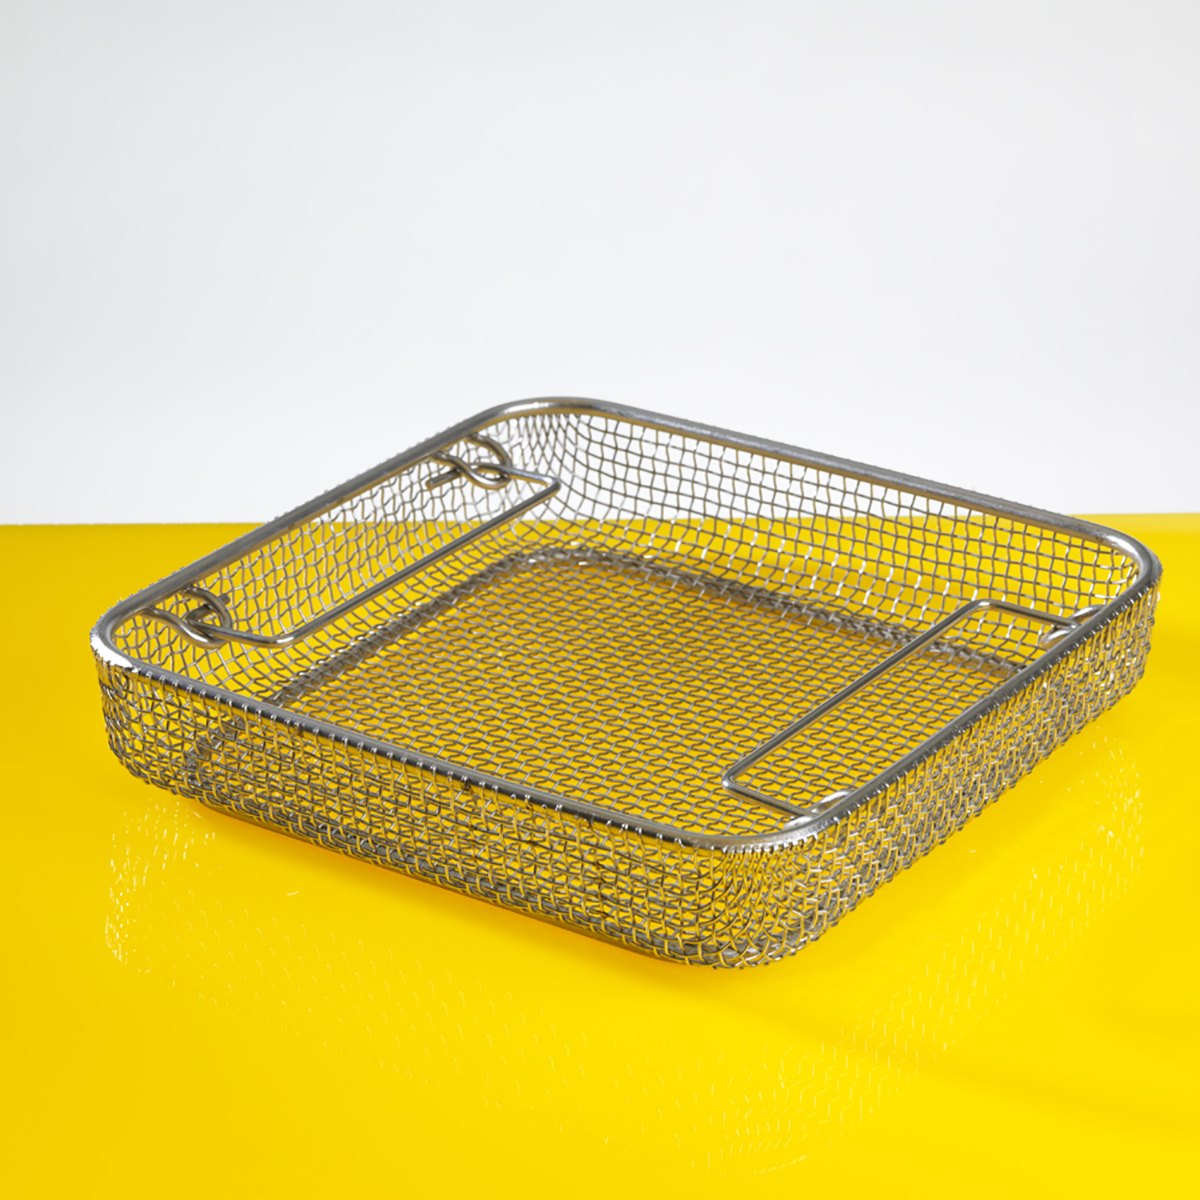 Flat Base Basket with Perforated Sides Image